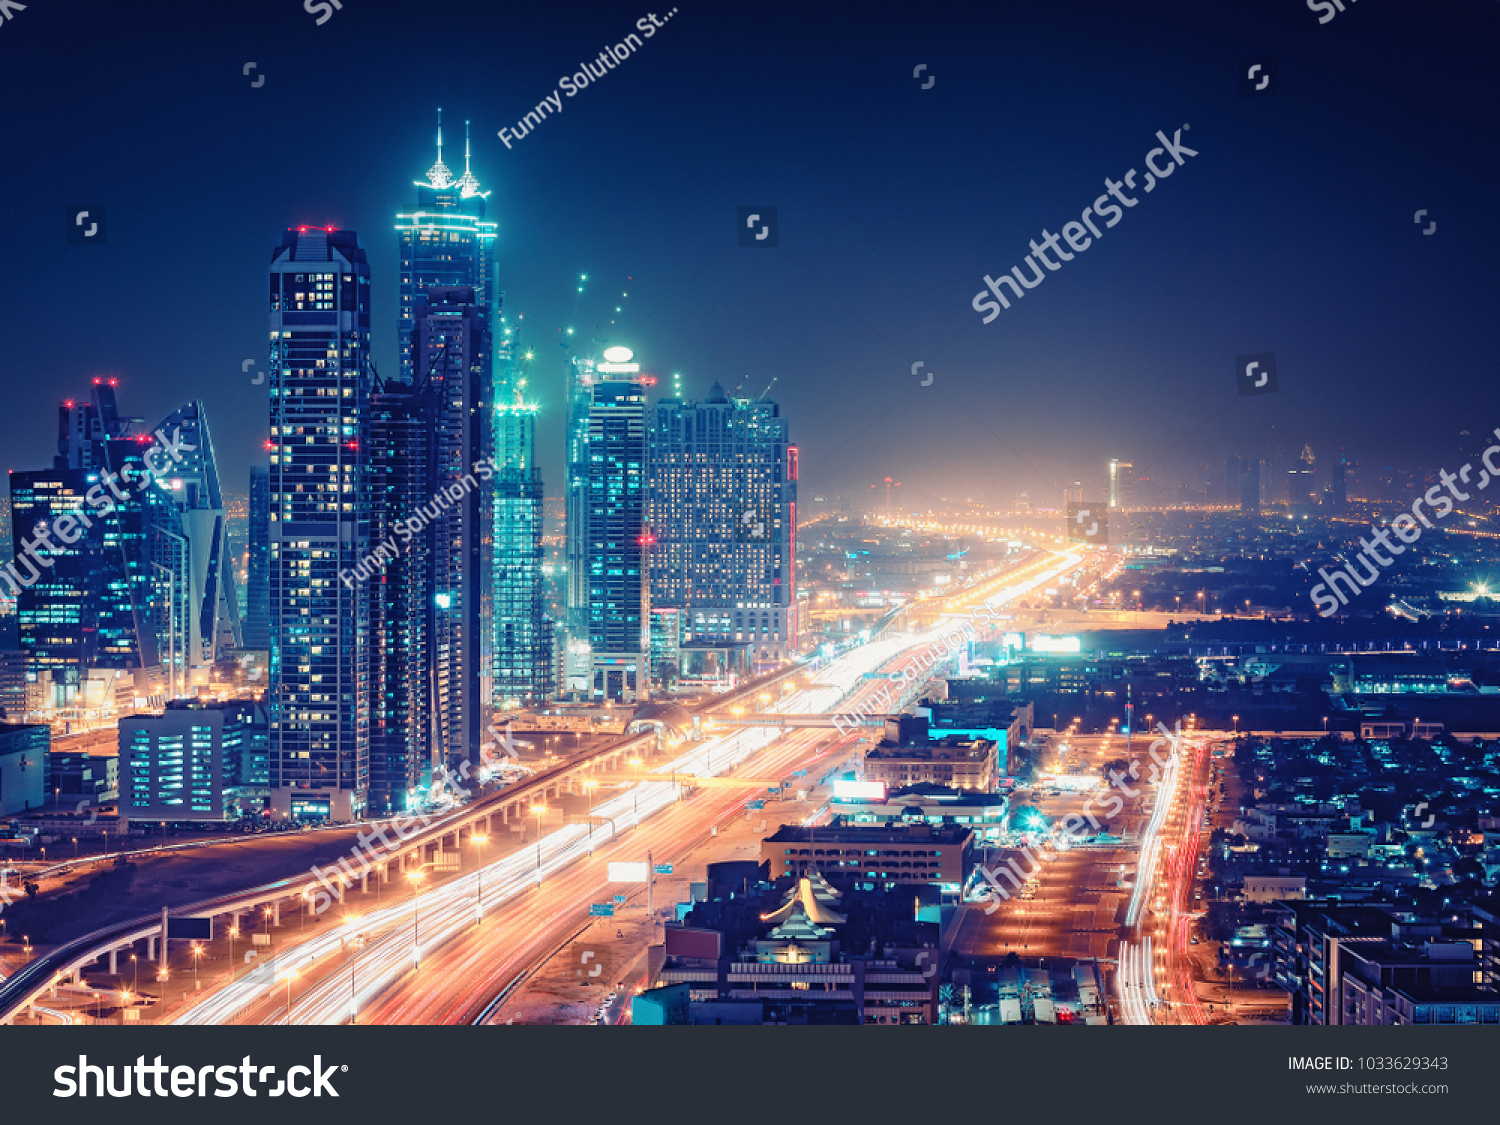 Spectacular nighttime skyline of a big modern city at night
. Dubai, UAE. Aerial view on highways and skyscrapers. #1033629343